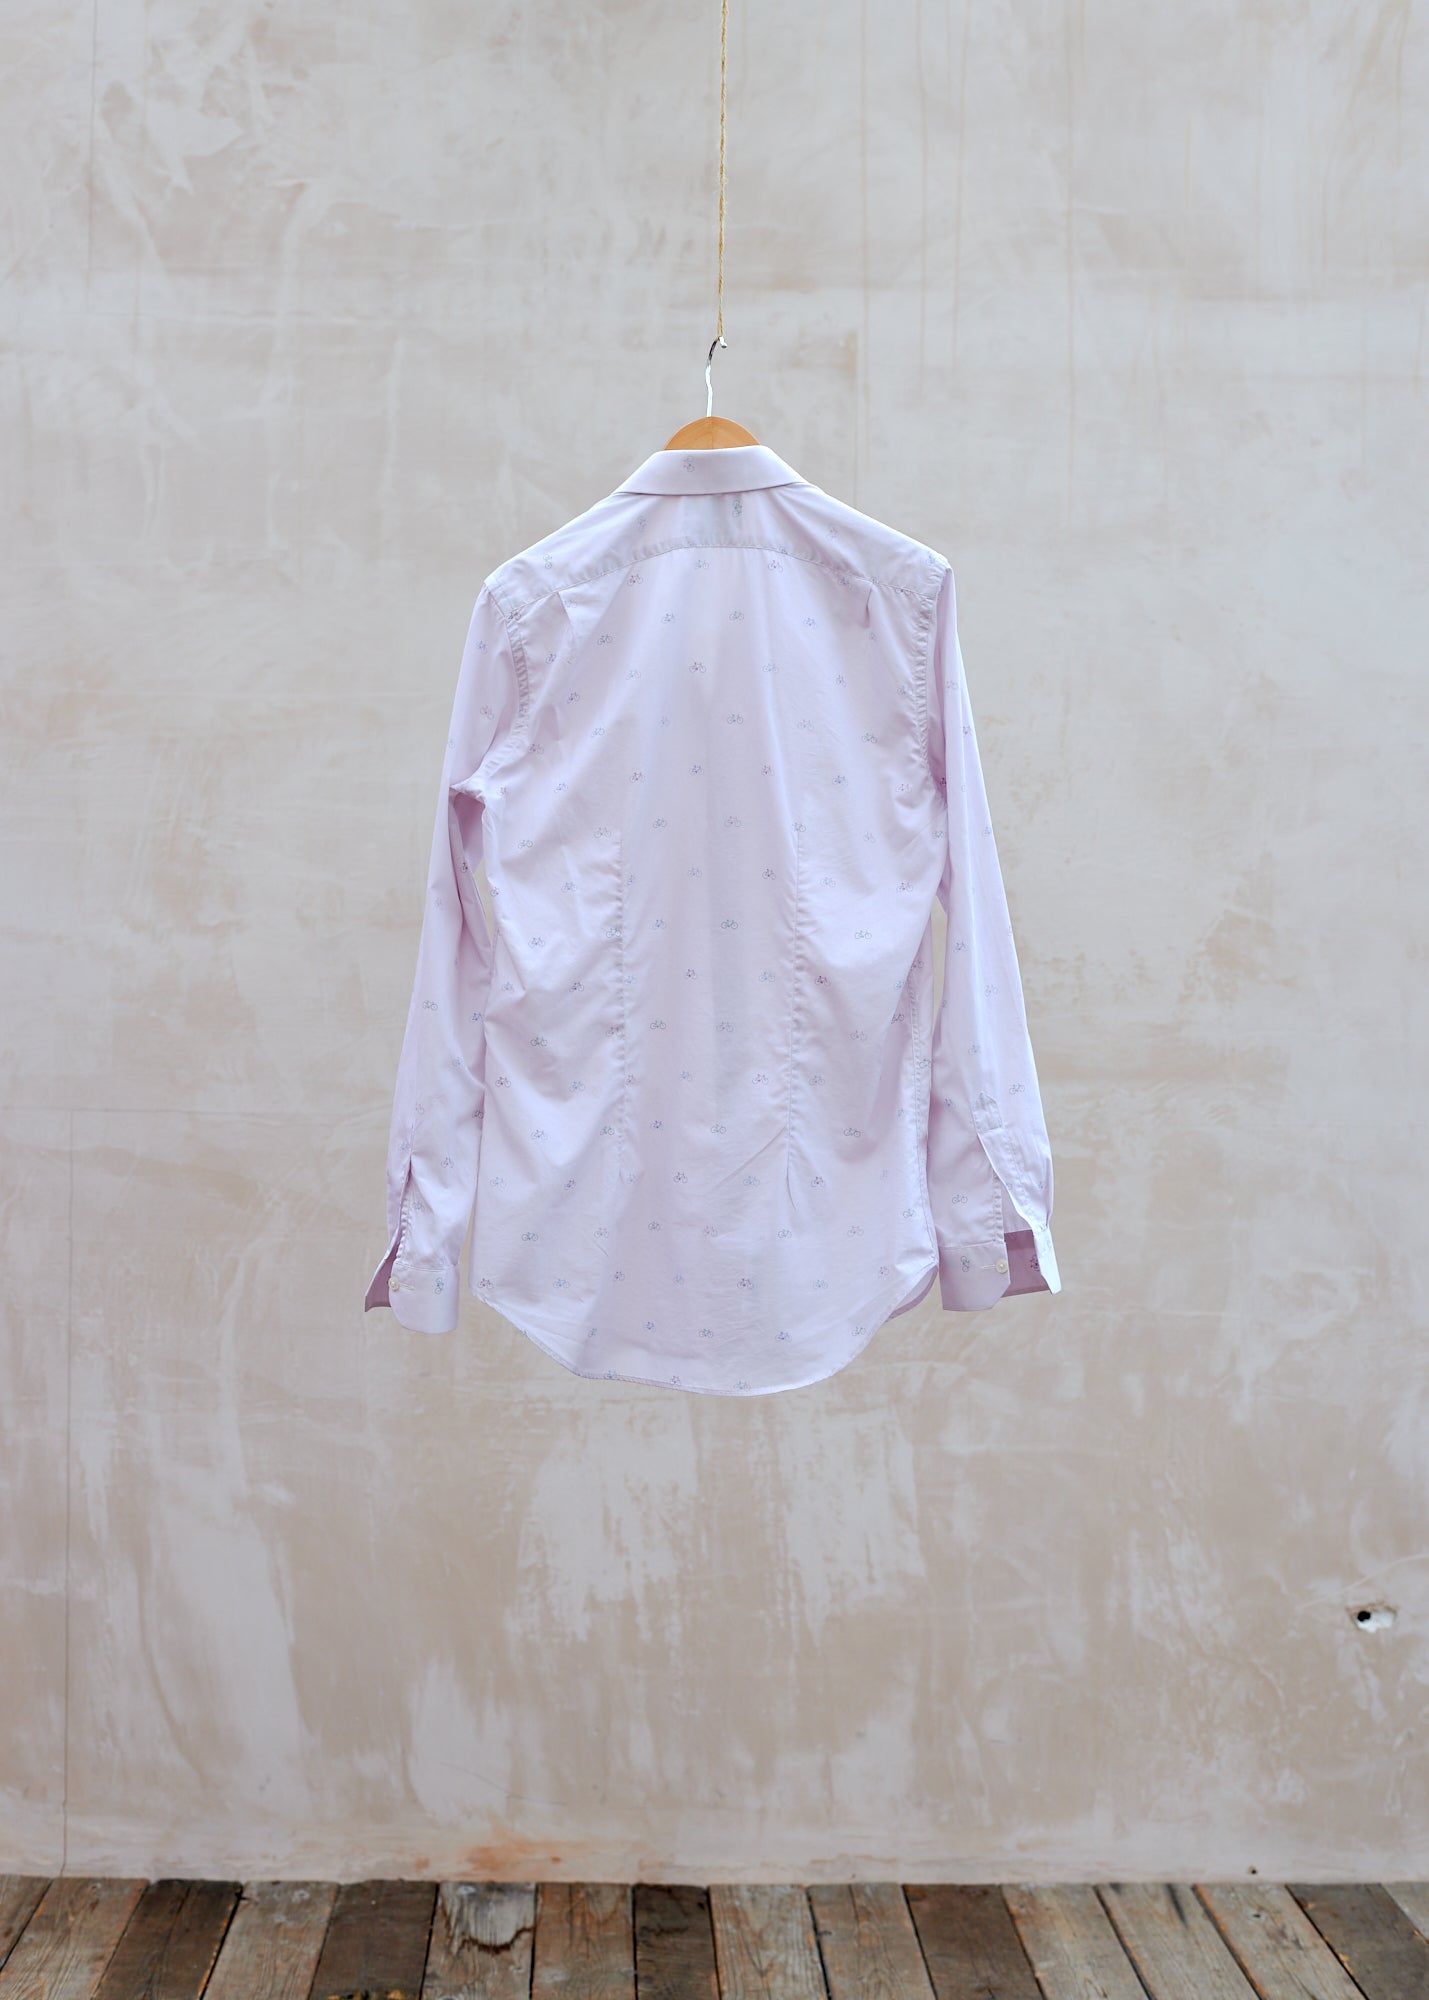 Paul Smith Light Pink Bicycle Patterned Shirt - M